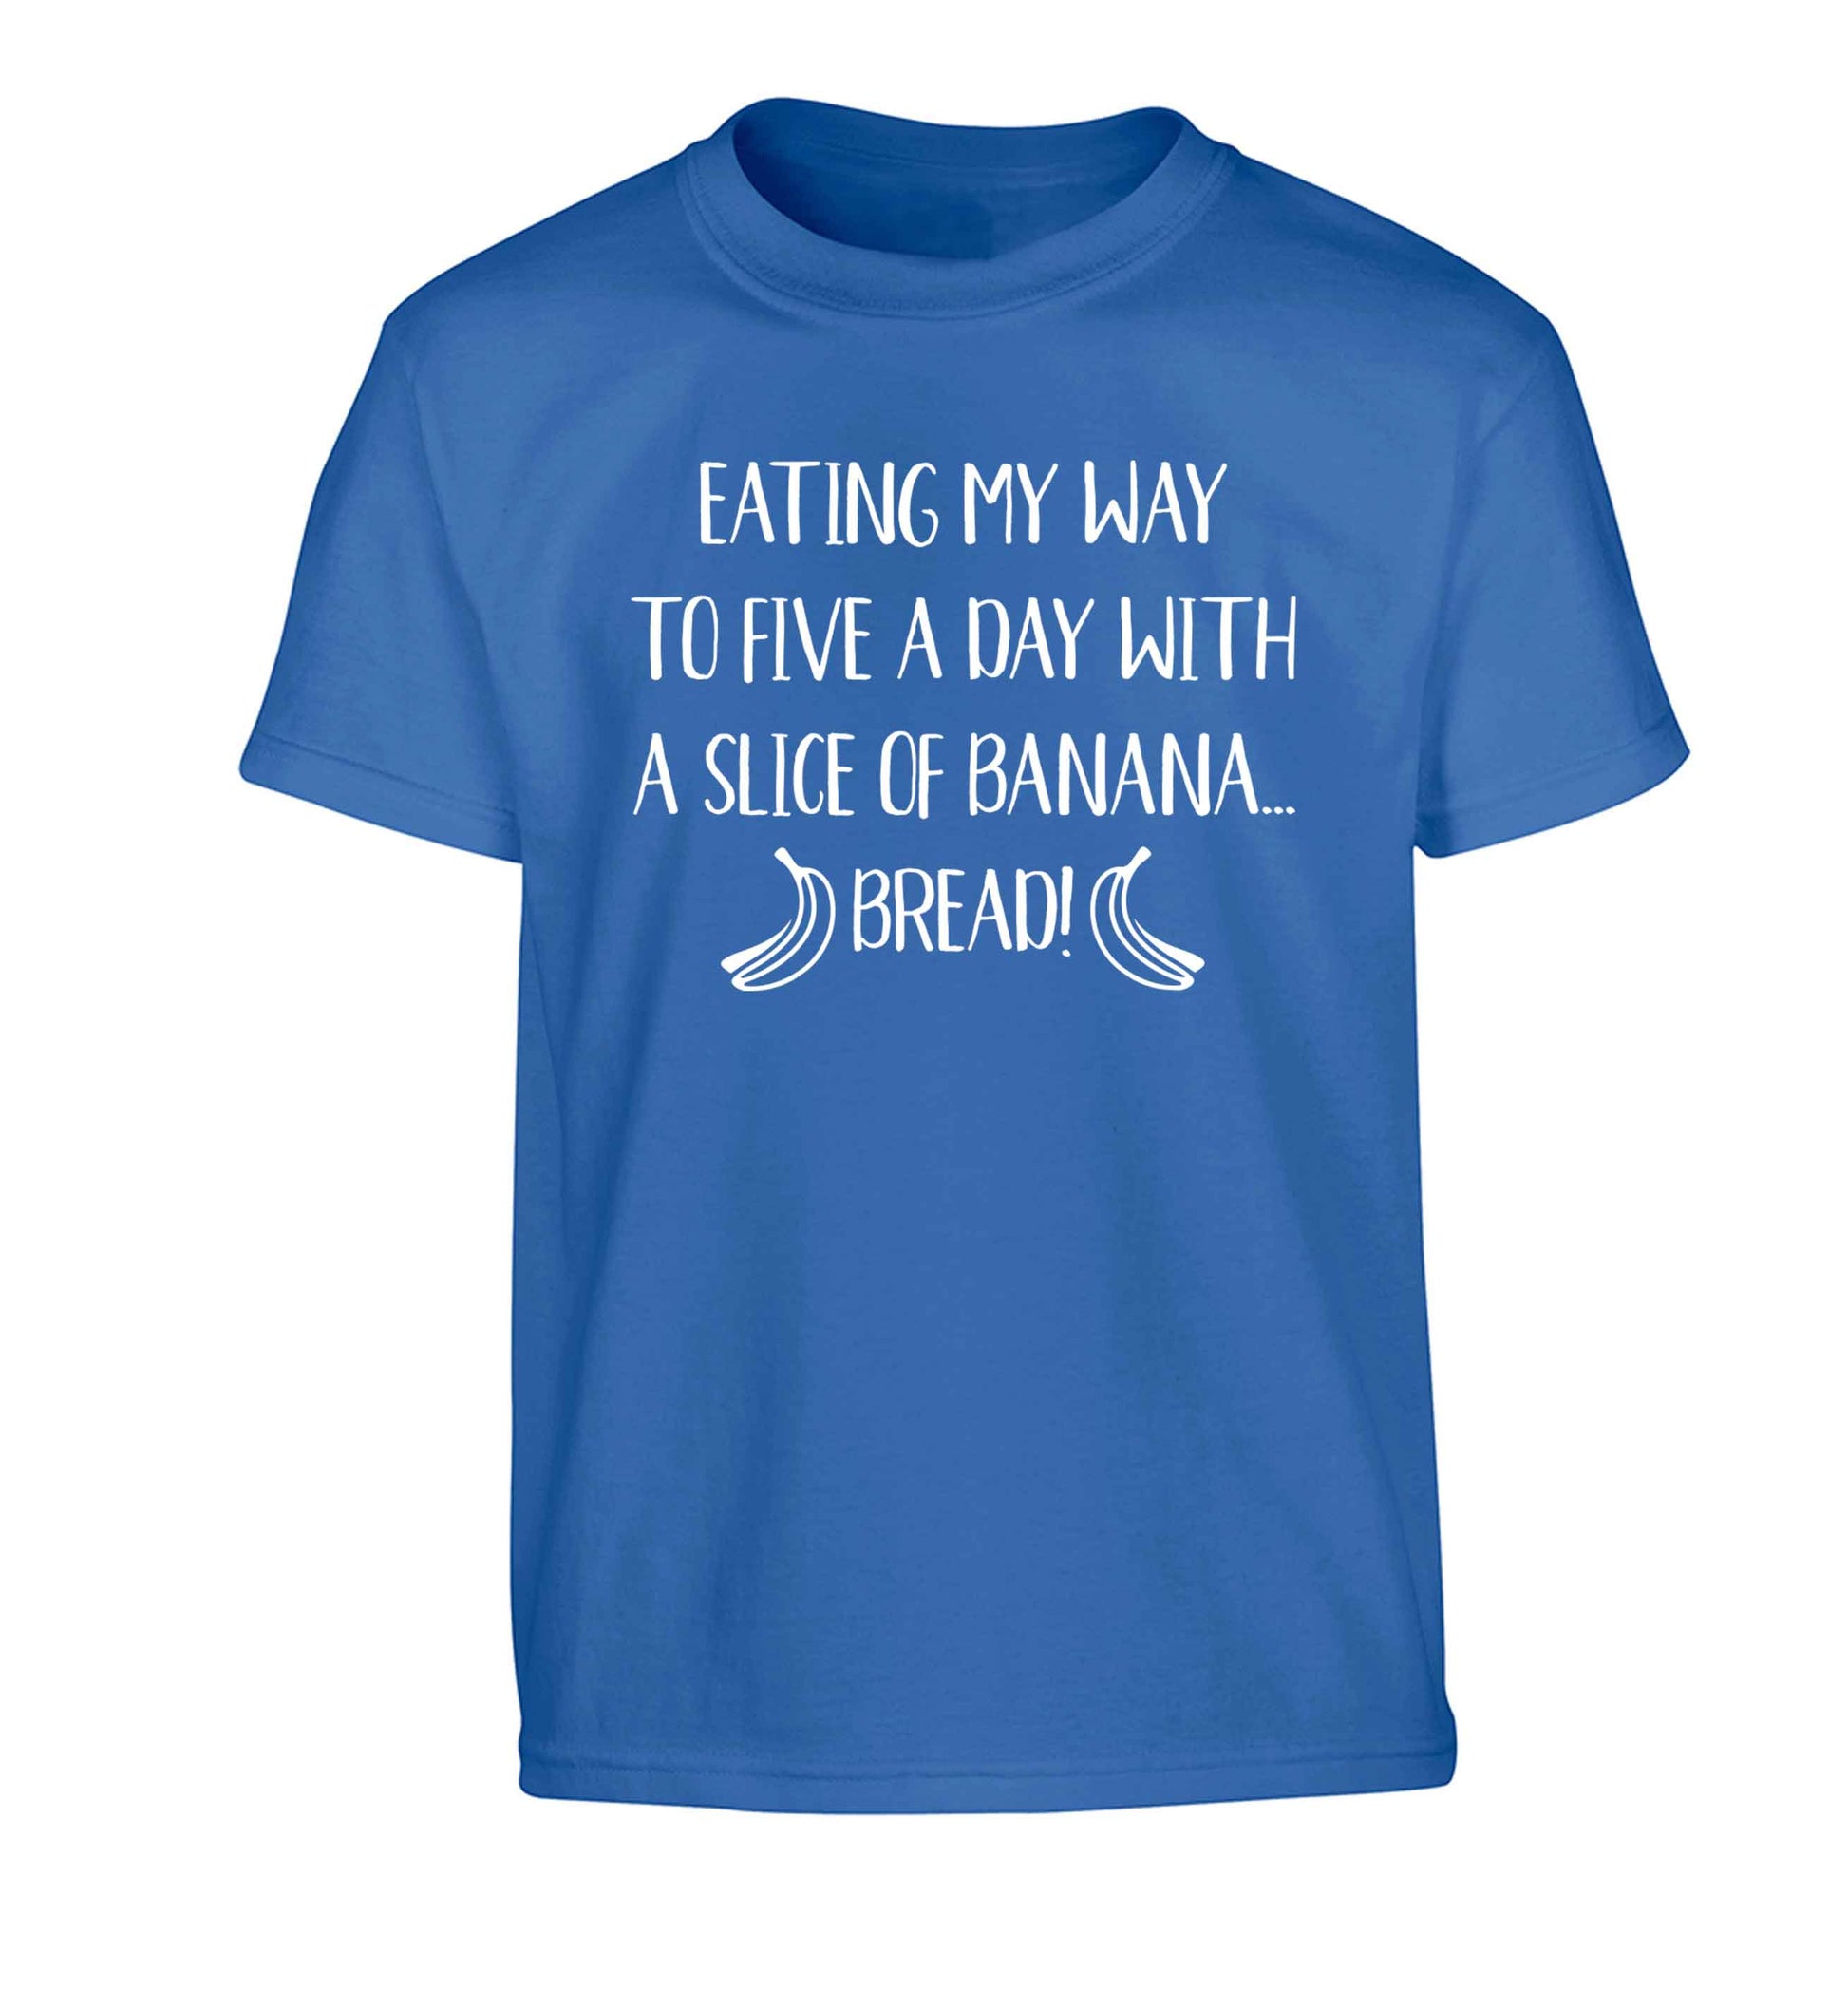 Eating my way to five a day with a slice of banana bread Children's blue Tshirt 12-13 Years